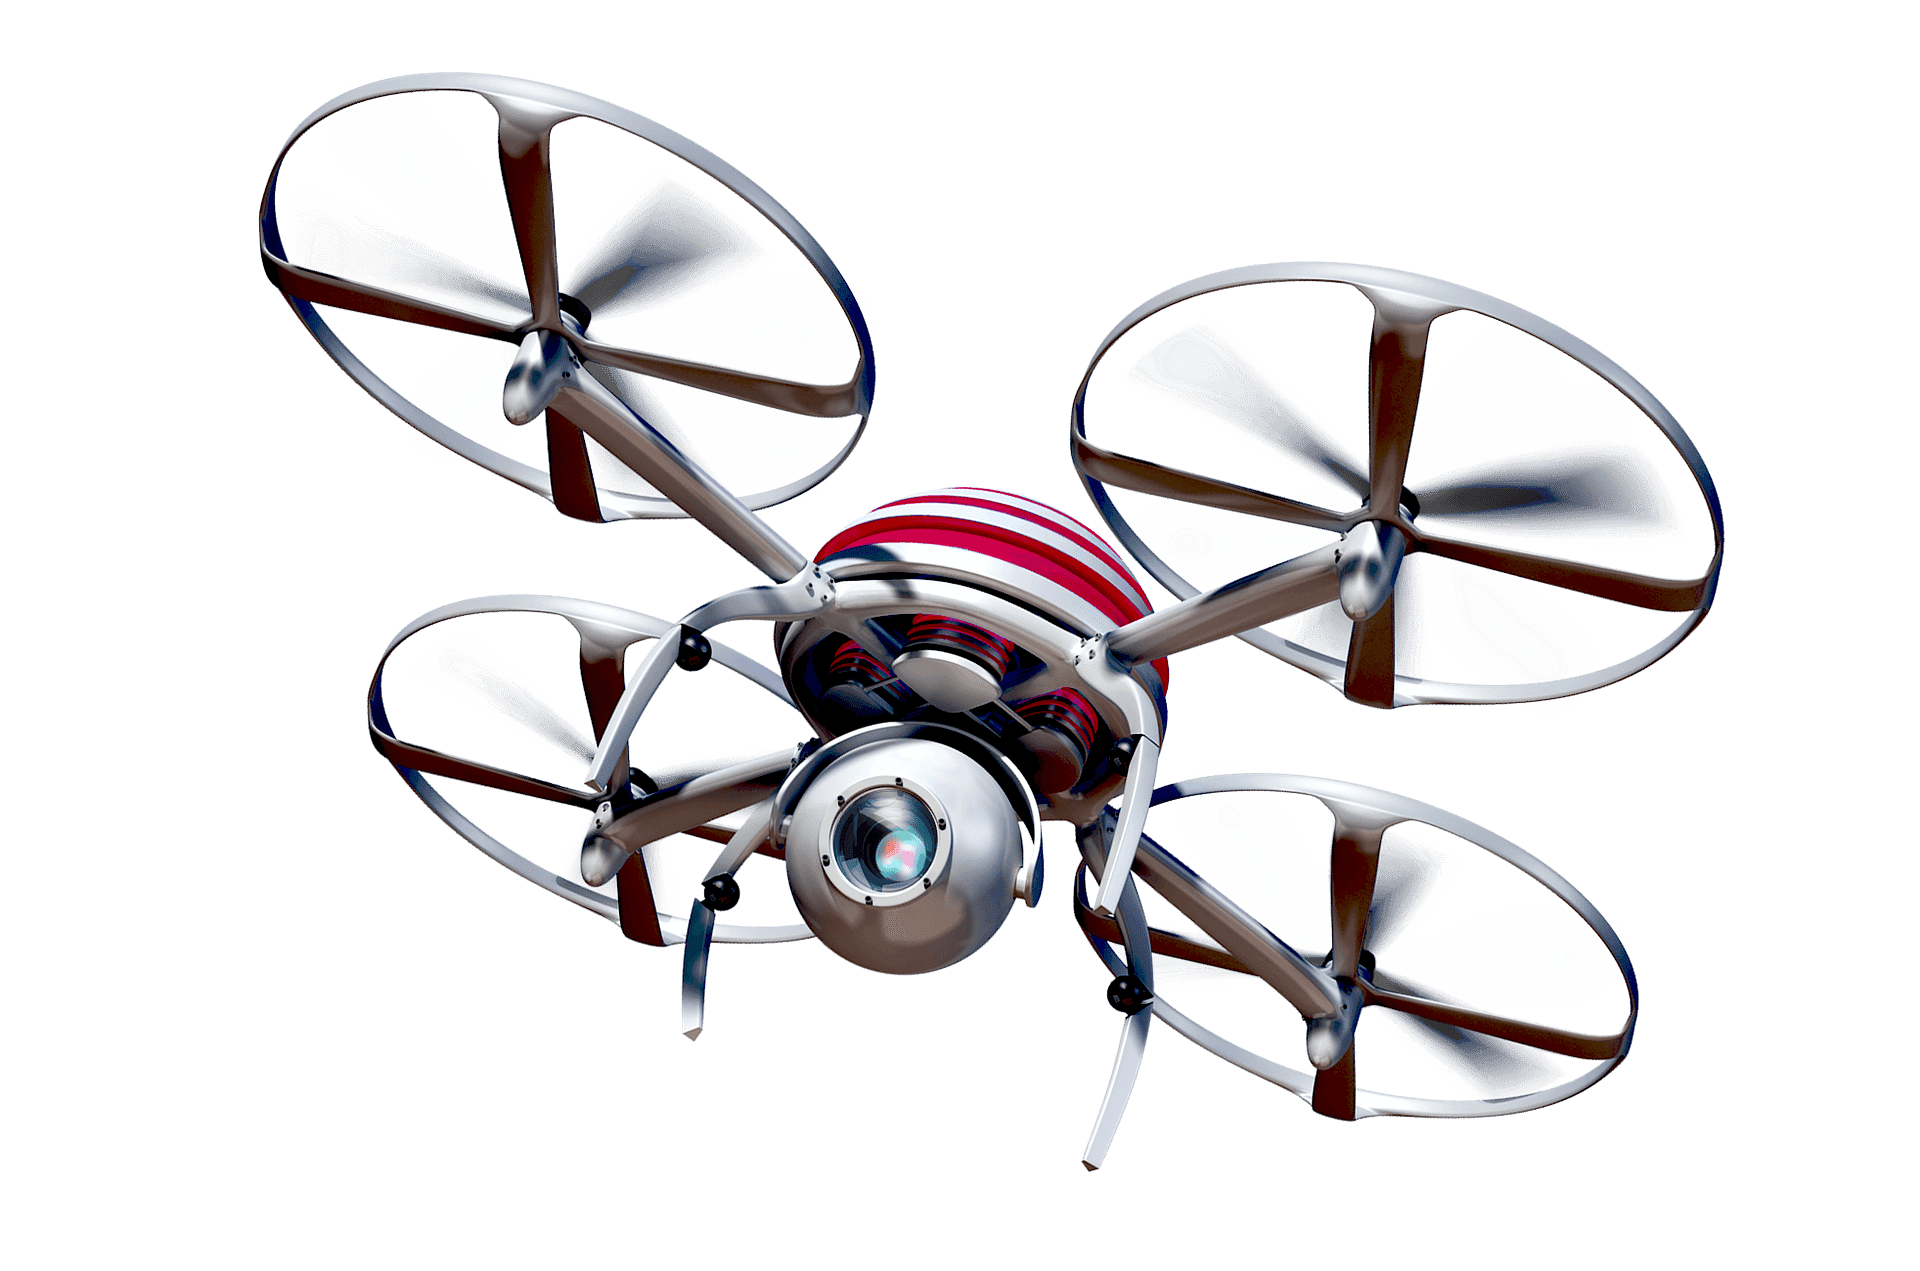 content/ar-ae/images/repository/isc/2020/a-spy-drone-with-large-camera-lens.png